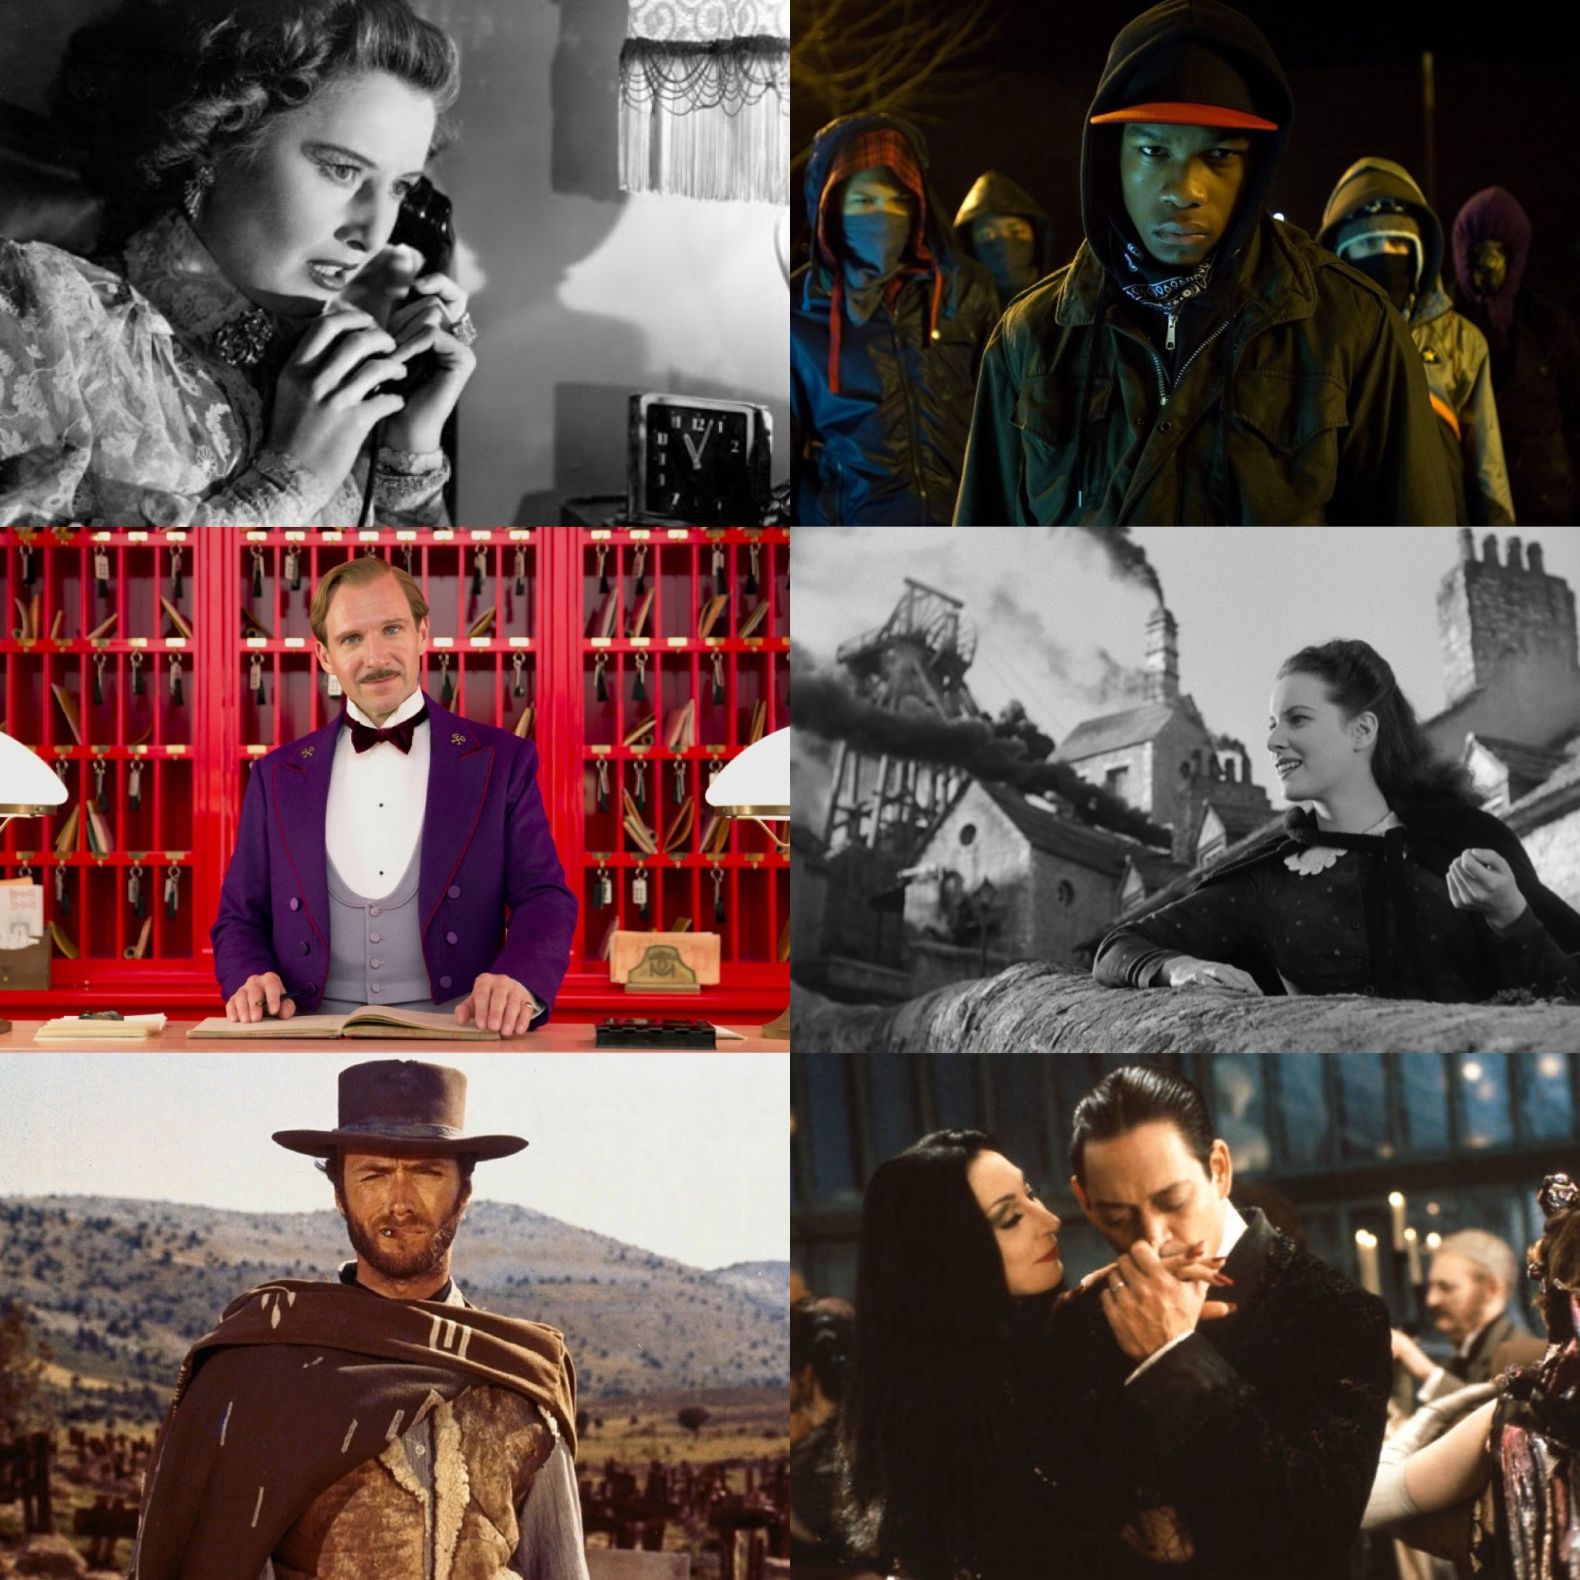 Duke Box #9: Our Guide to the Best Films on TV